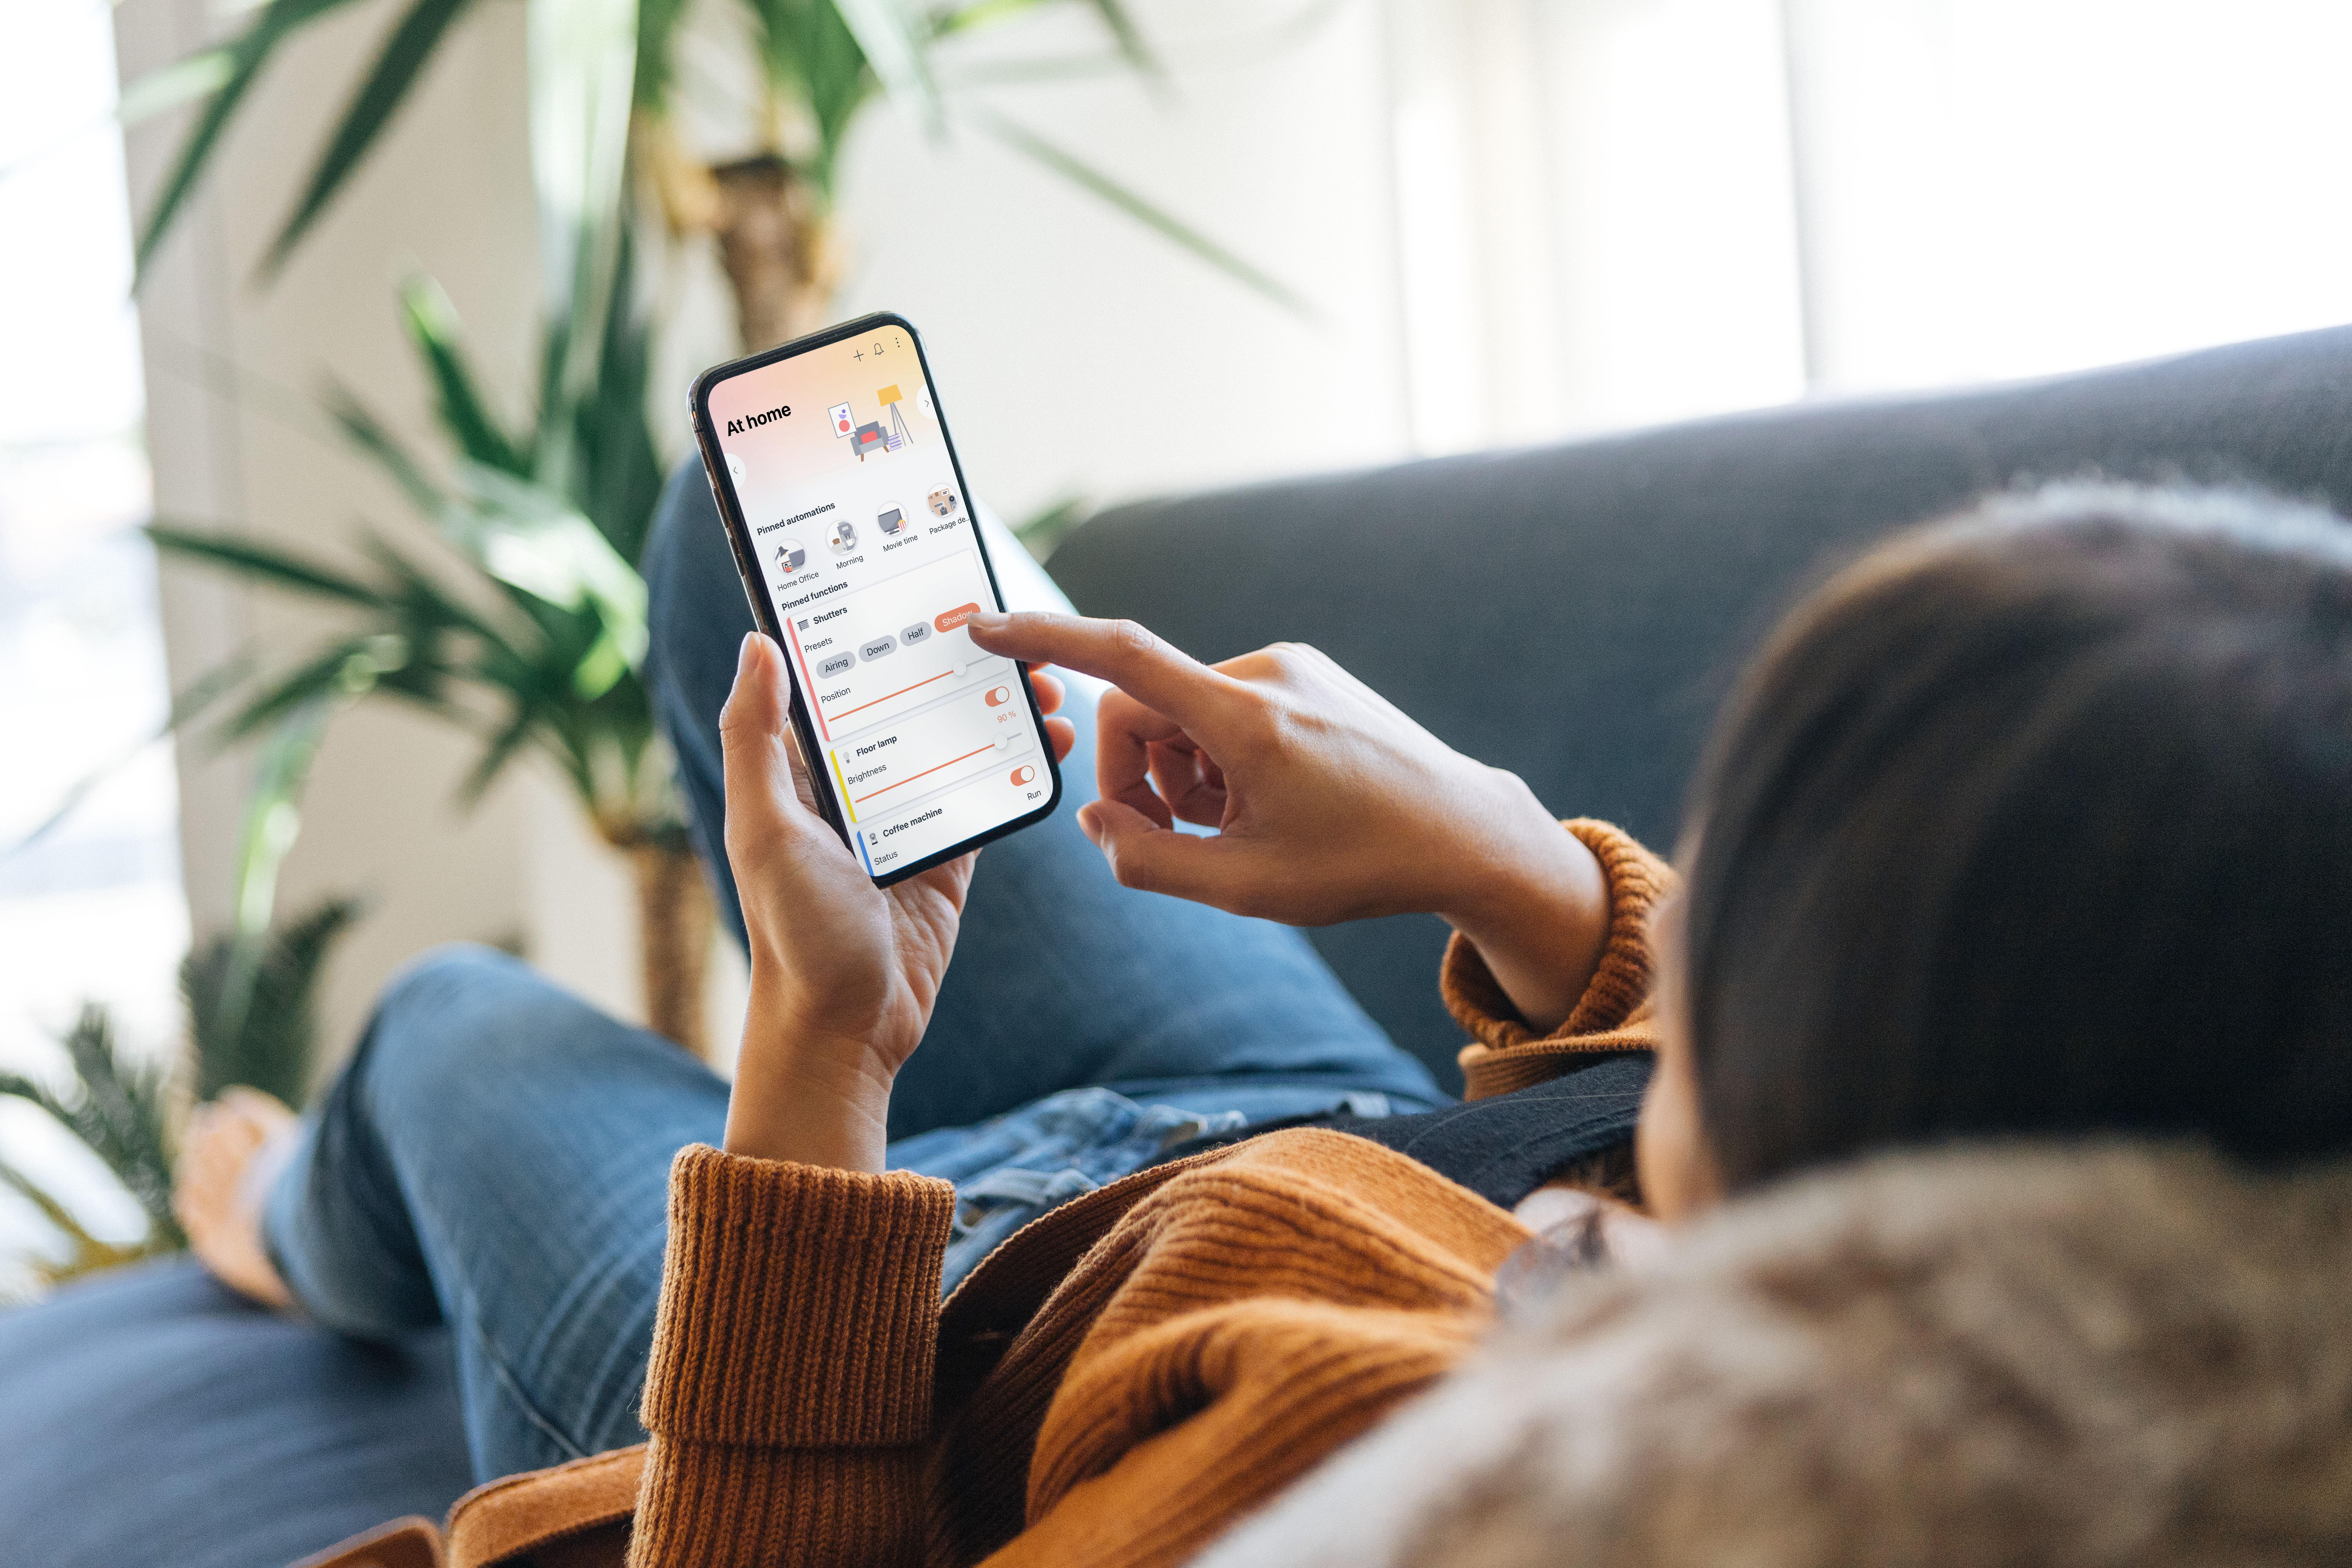 Home Connect Plus – the intuitive app for a lot of smart home devices